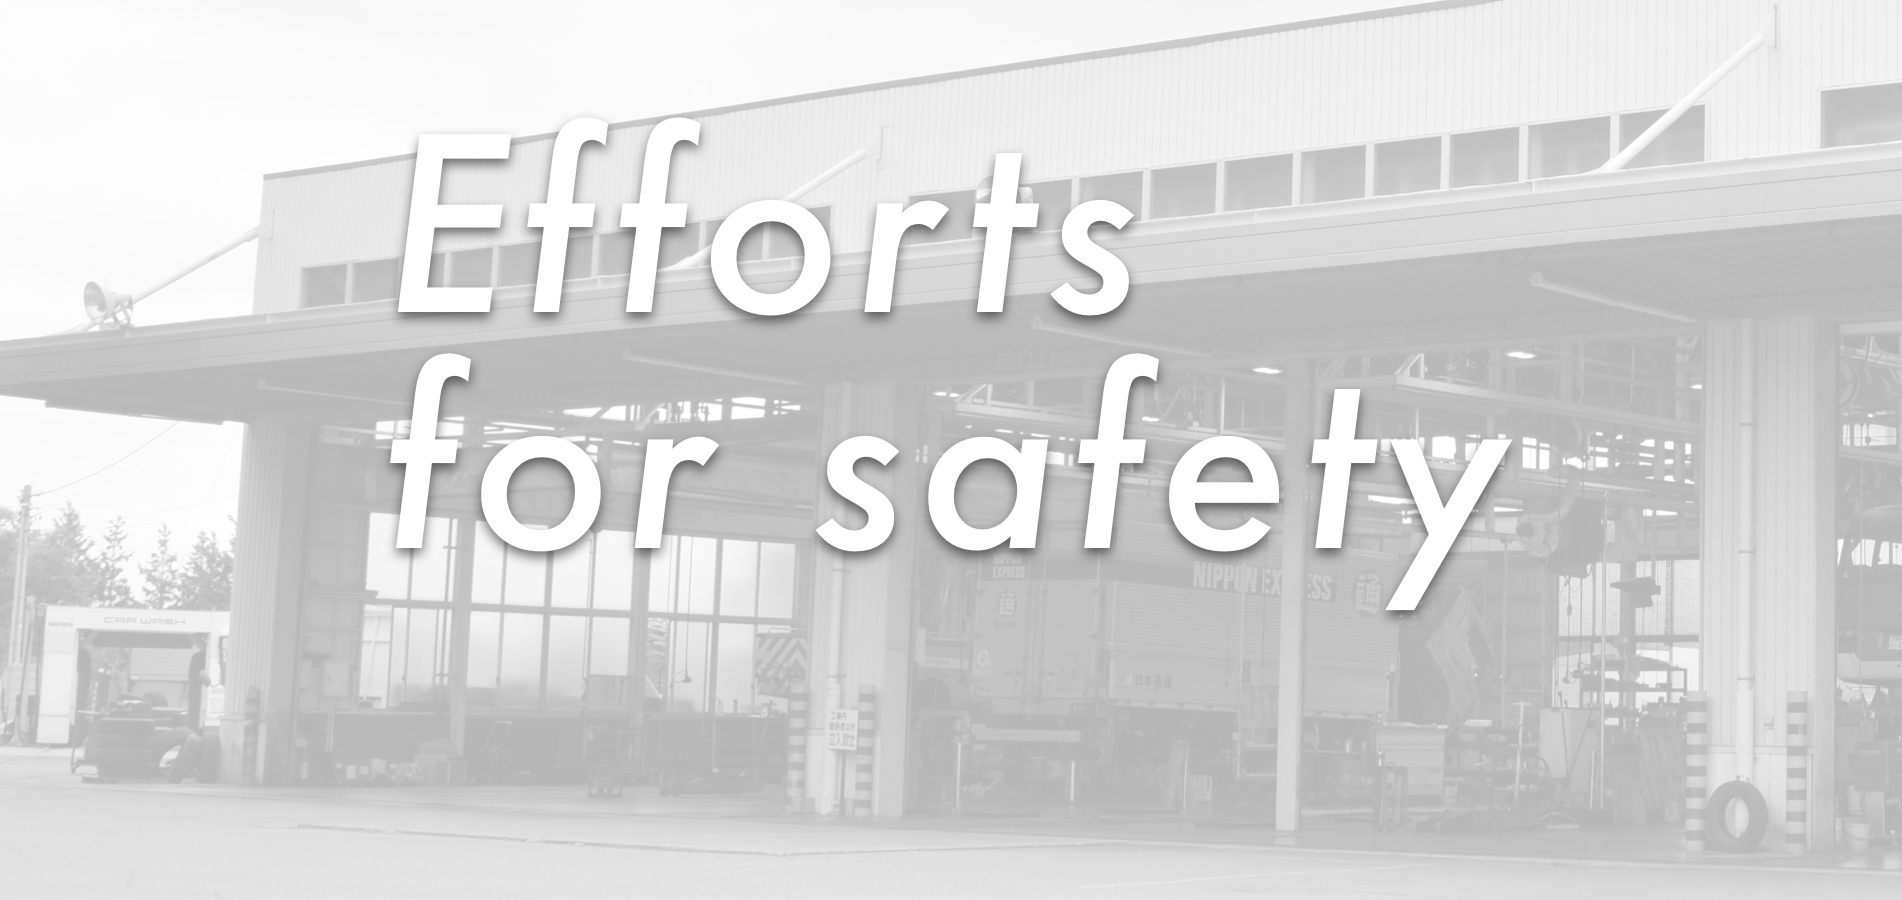 Efforts for safety｜安全への取り組み